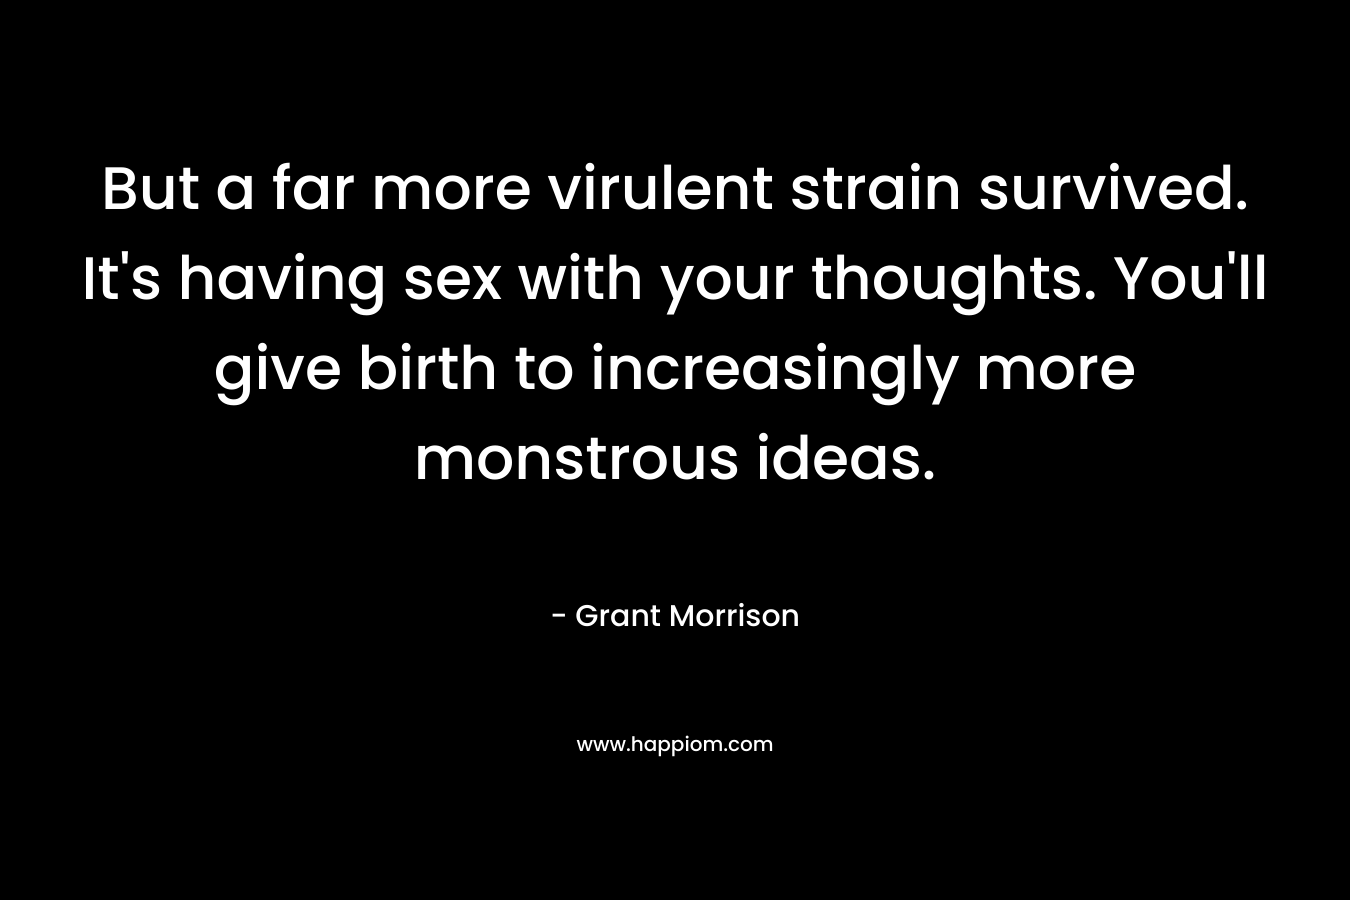 But a far more virulent strain survived. It’s having sex with your thoughts. You’ll give birth to increasingly more monstrous ideas. – Grant Morrison